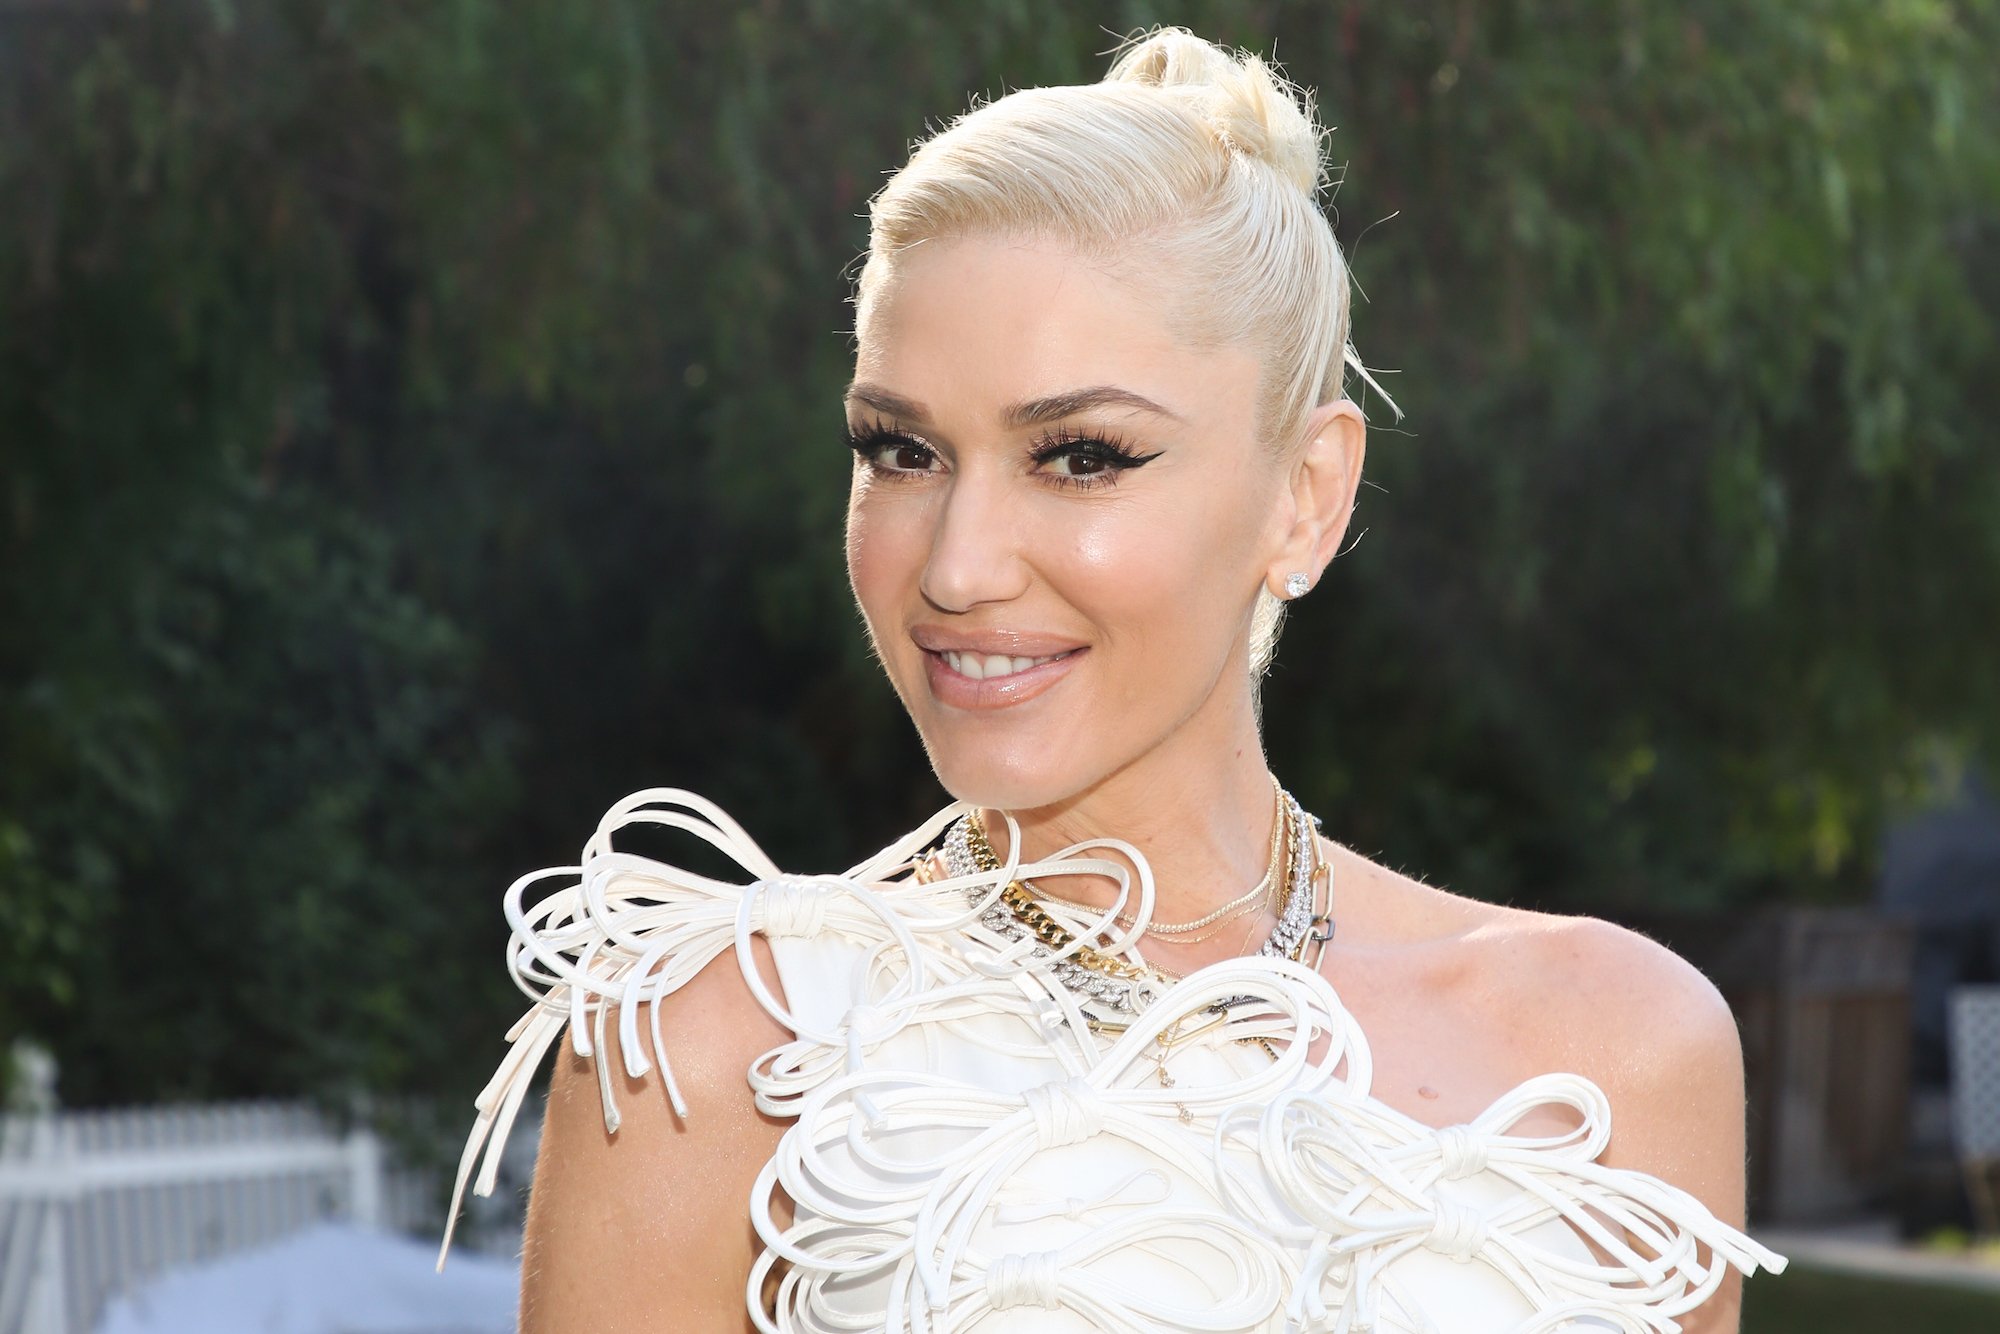 Gwen Stefani smiling in front of a grove of bushes